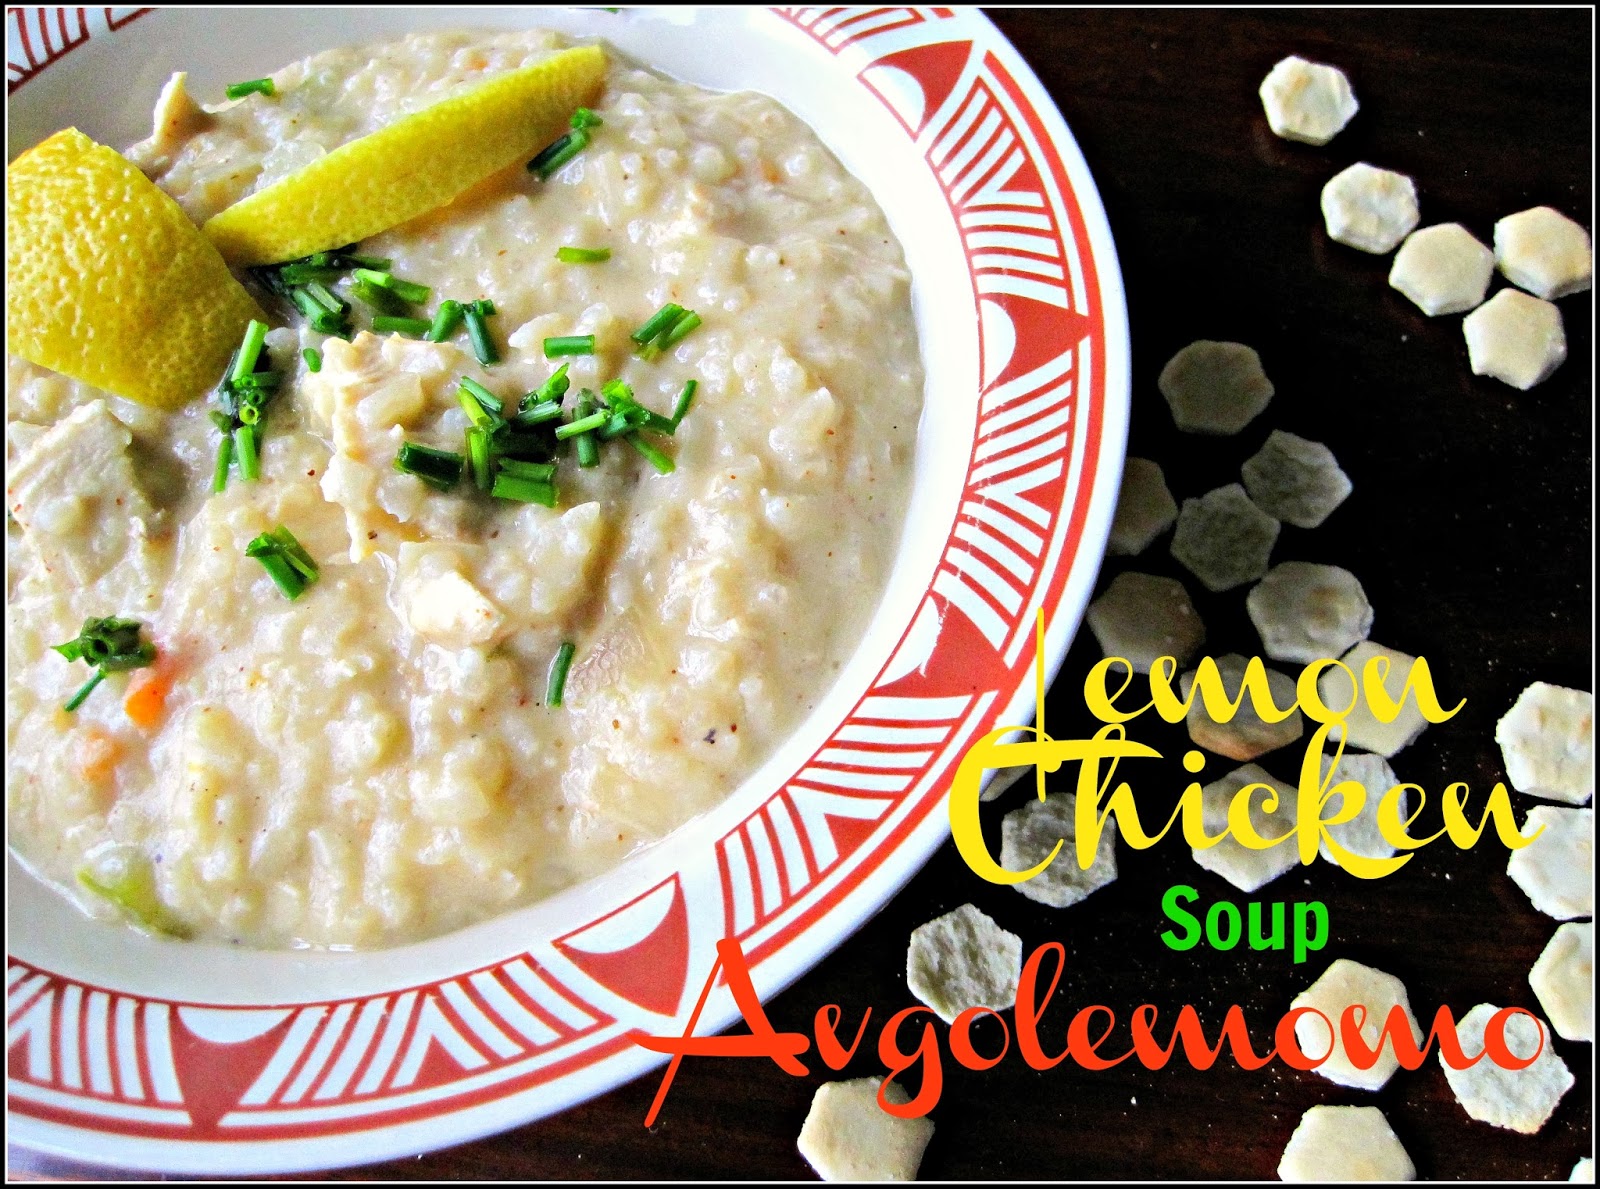 Avgolemono Lemon Rice and Chicken Soup Recipe, a classic tangy and creamy soup, done in just about 30 minute, just what we need in a cold winter night or any night